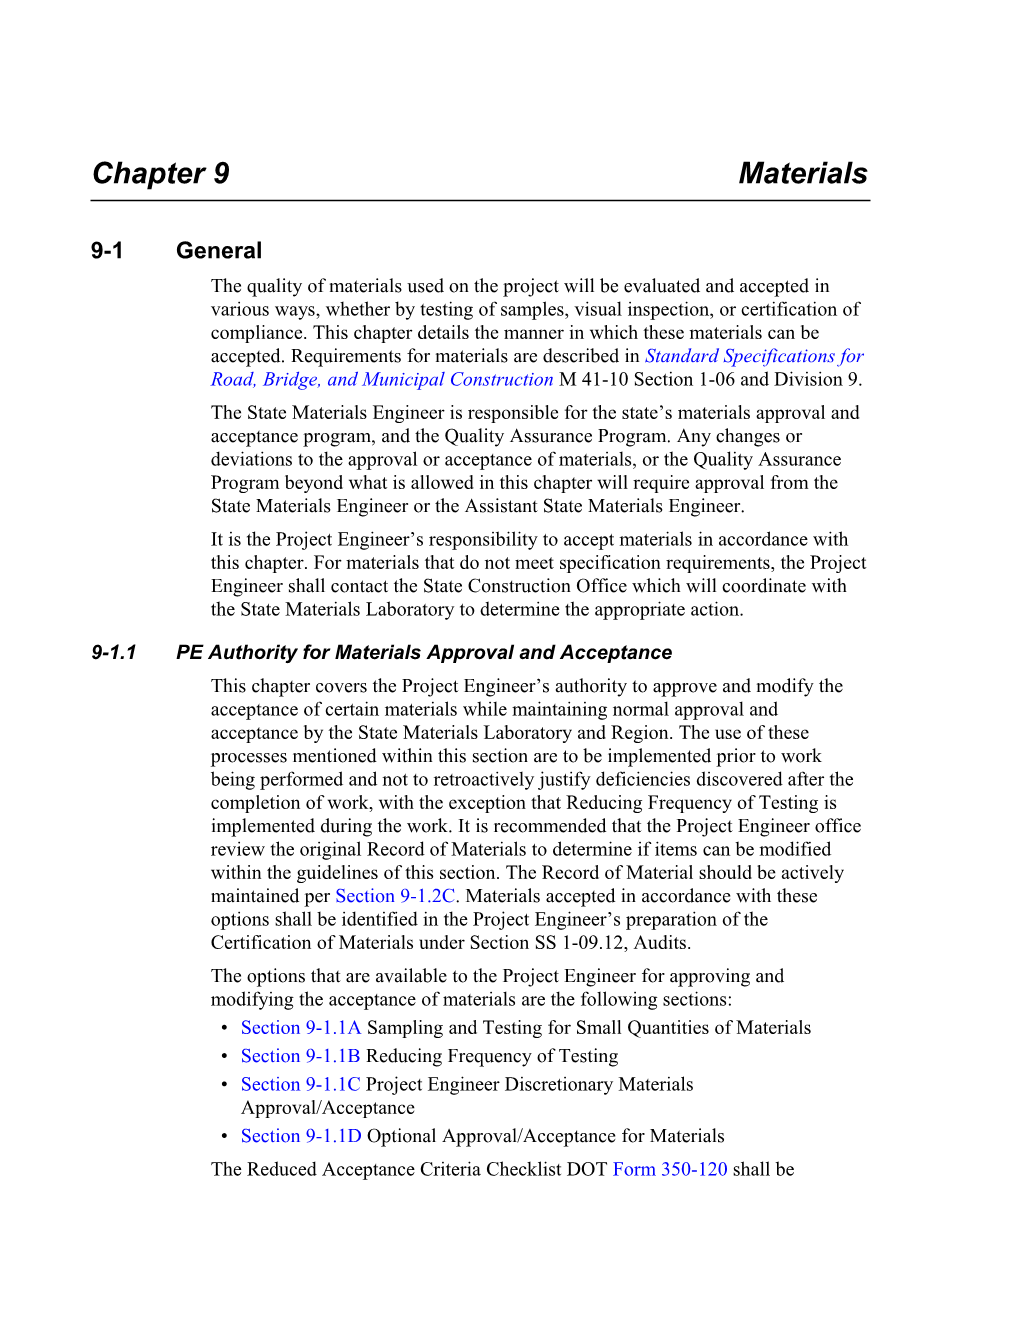 9-1.1PE Authority for Materials Approval and Acceptance